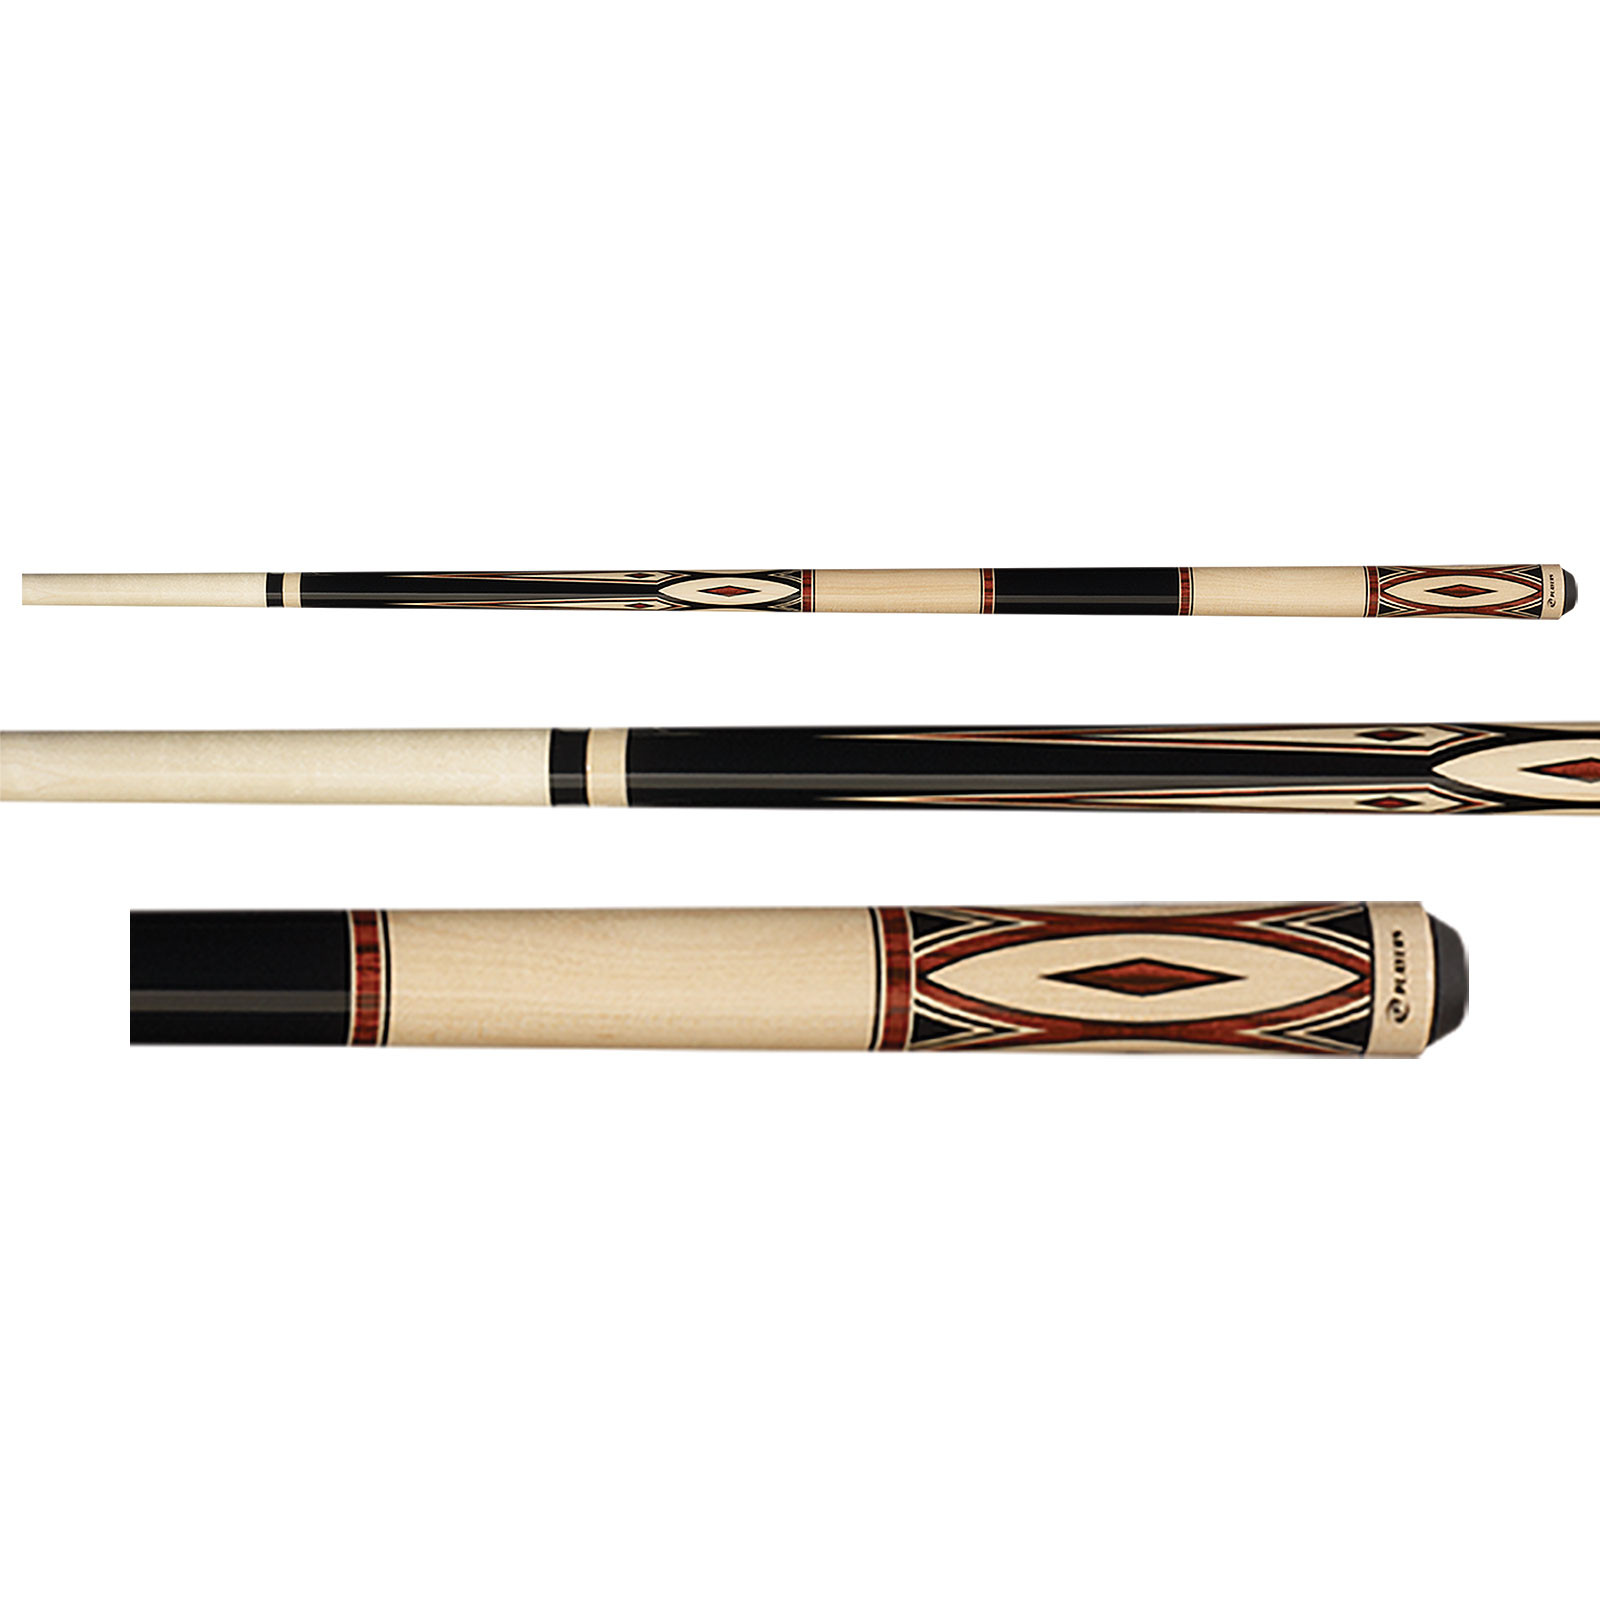 Players G-3394 Black and Tan Rengas Pool Cue Stick